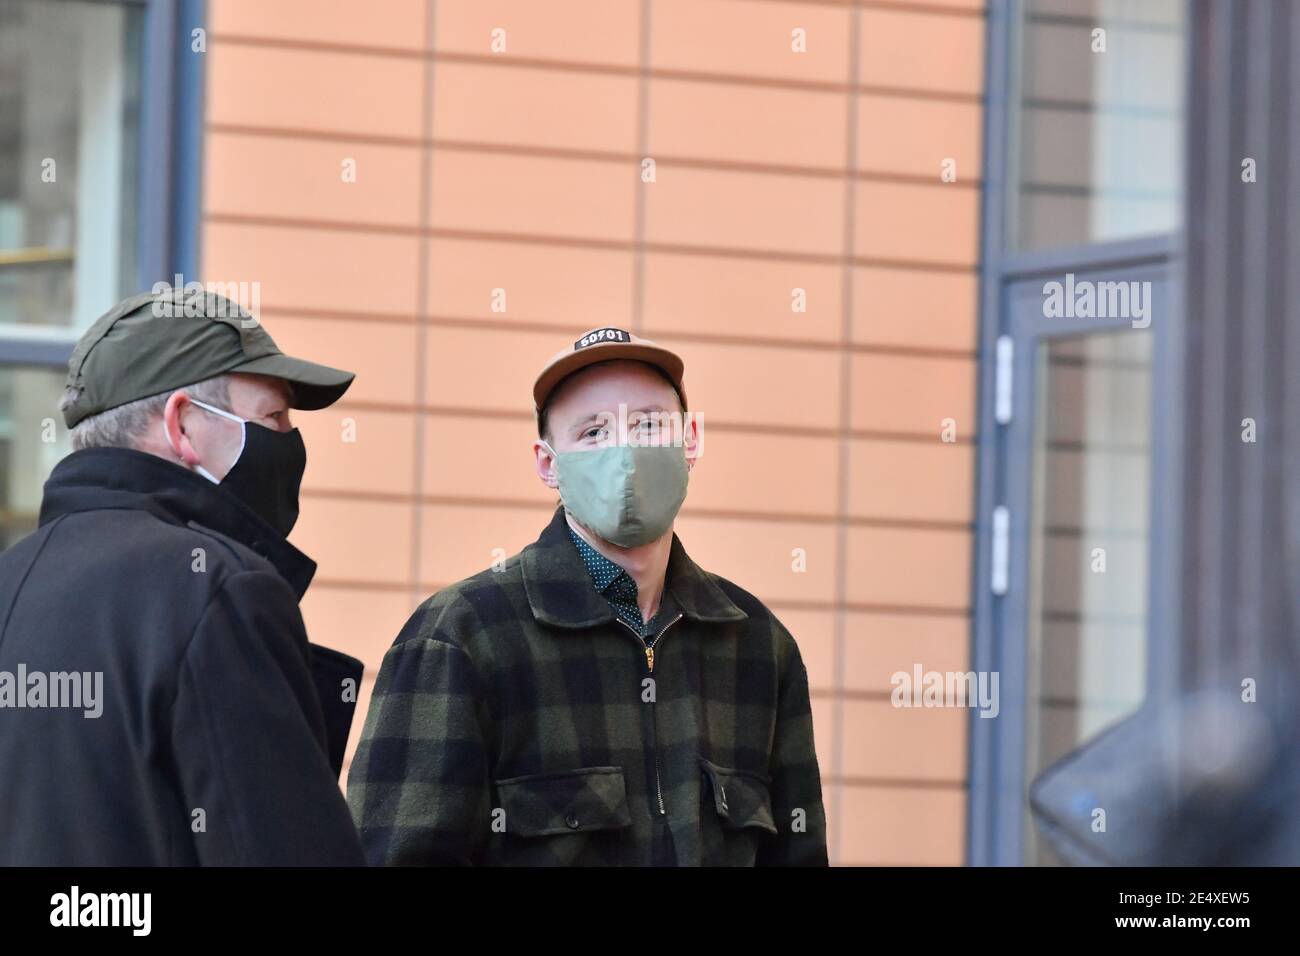 Milo Ponsford, 25, arrives at Bristol Magistrates' Court where he and three others are appearing charged with criminal damage over the toppling of the Edward Colston statue in Bristol during the Black Lives Matter protests in June last year. Picture date: Monday January 25, 2021. Stock Photo